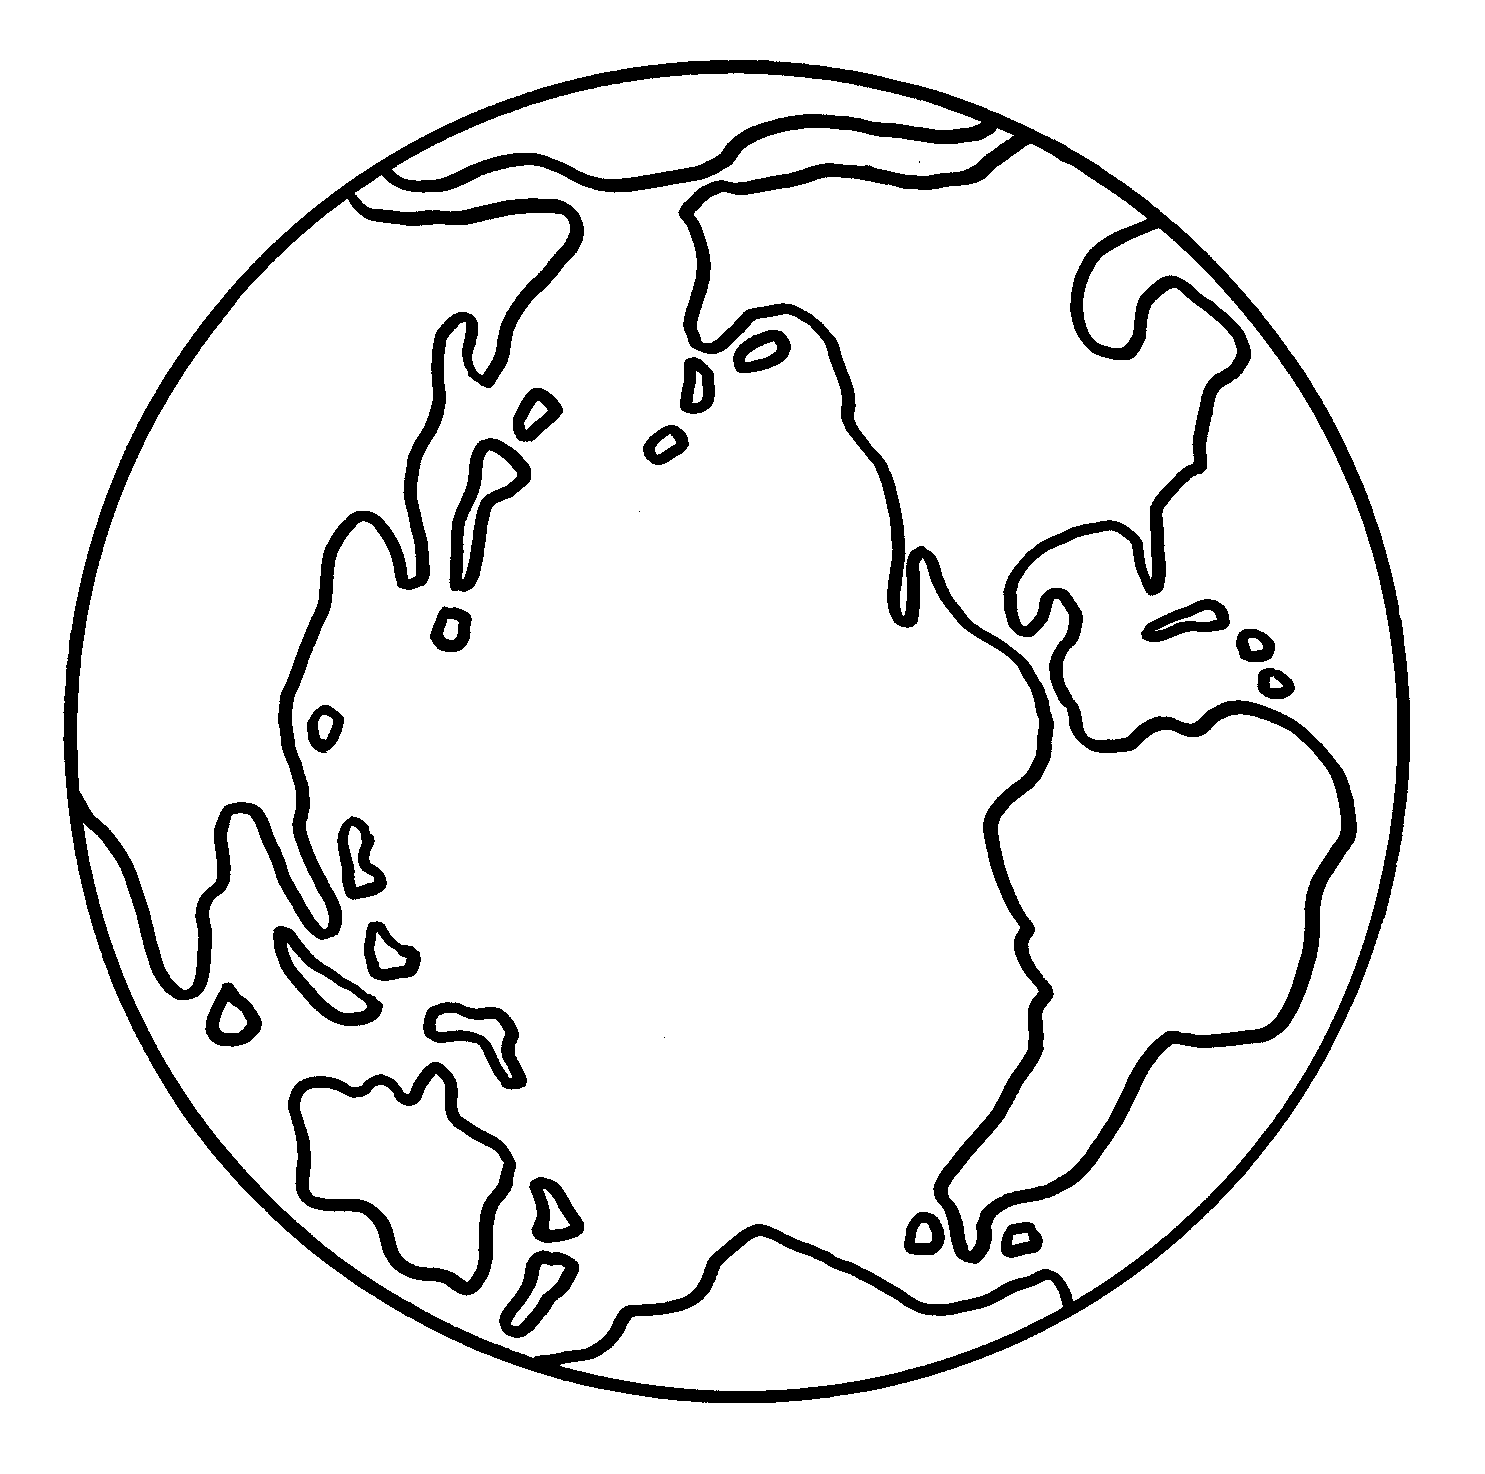 World  black and white earth clipart black and white free images